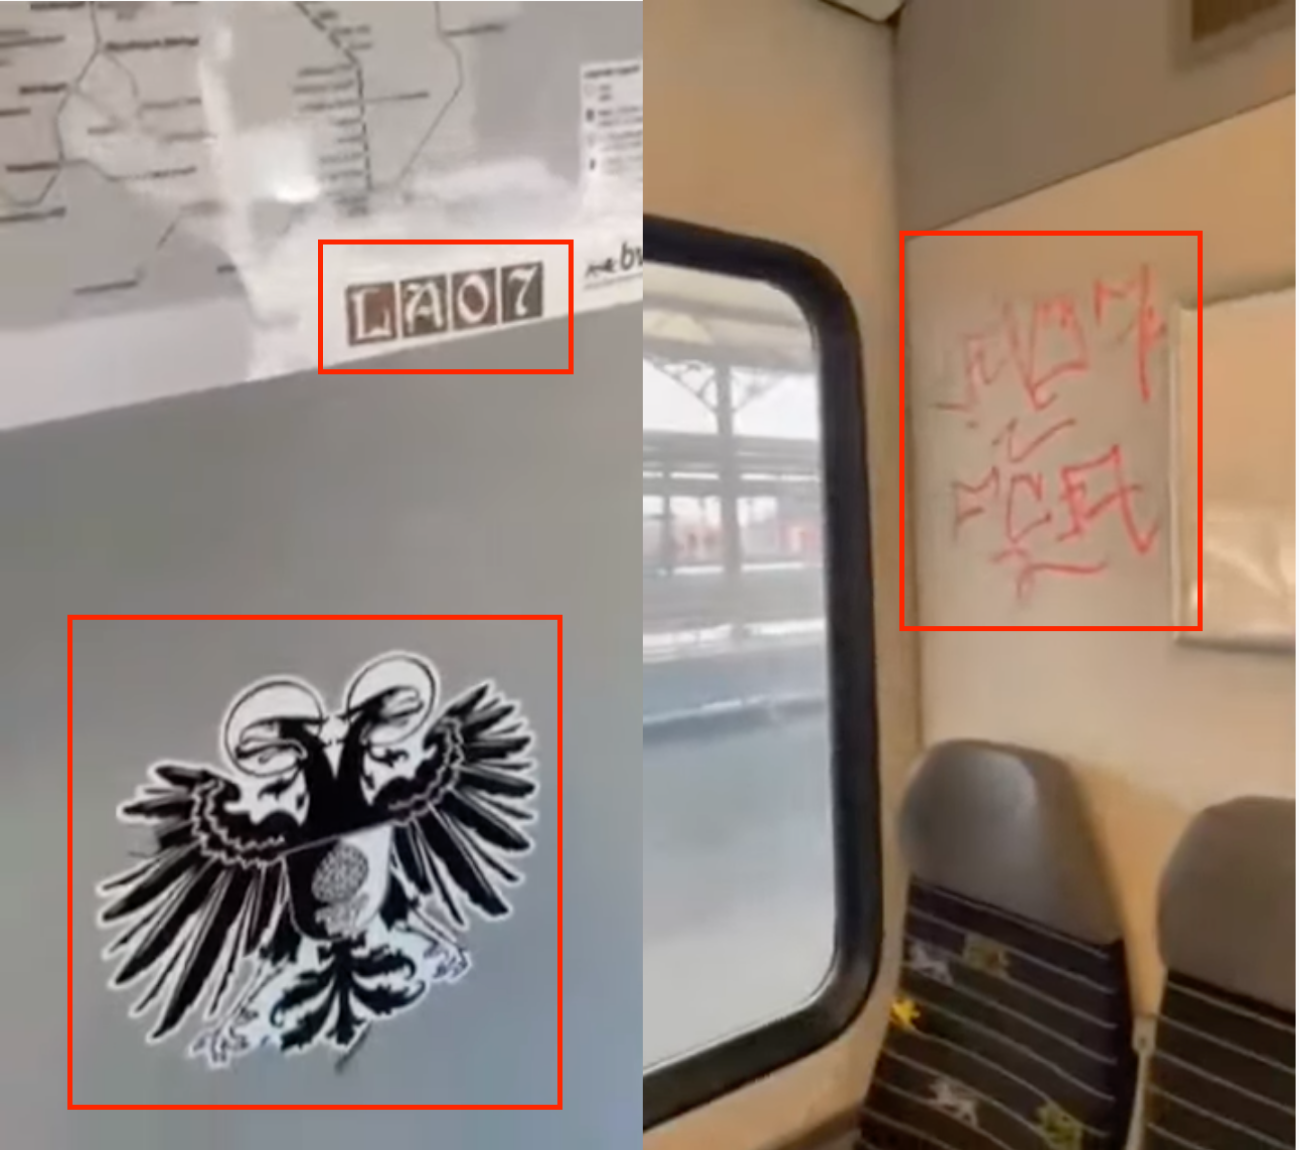 Stickers and graffiti left by fans